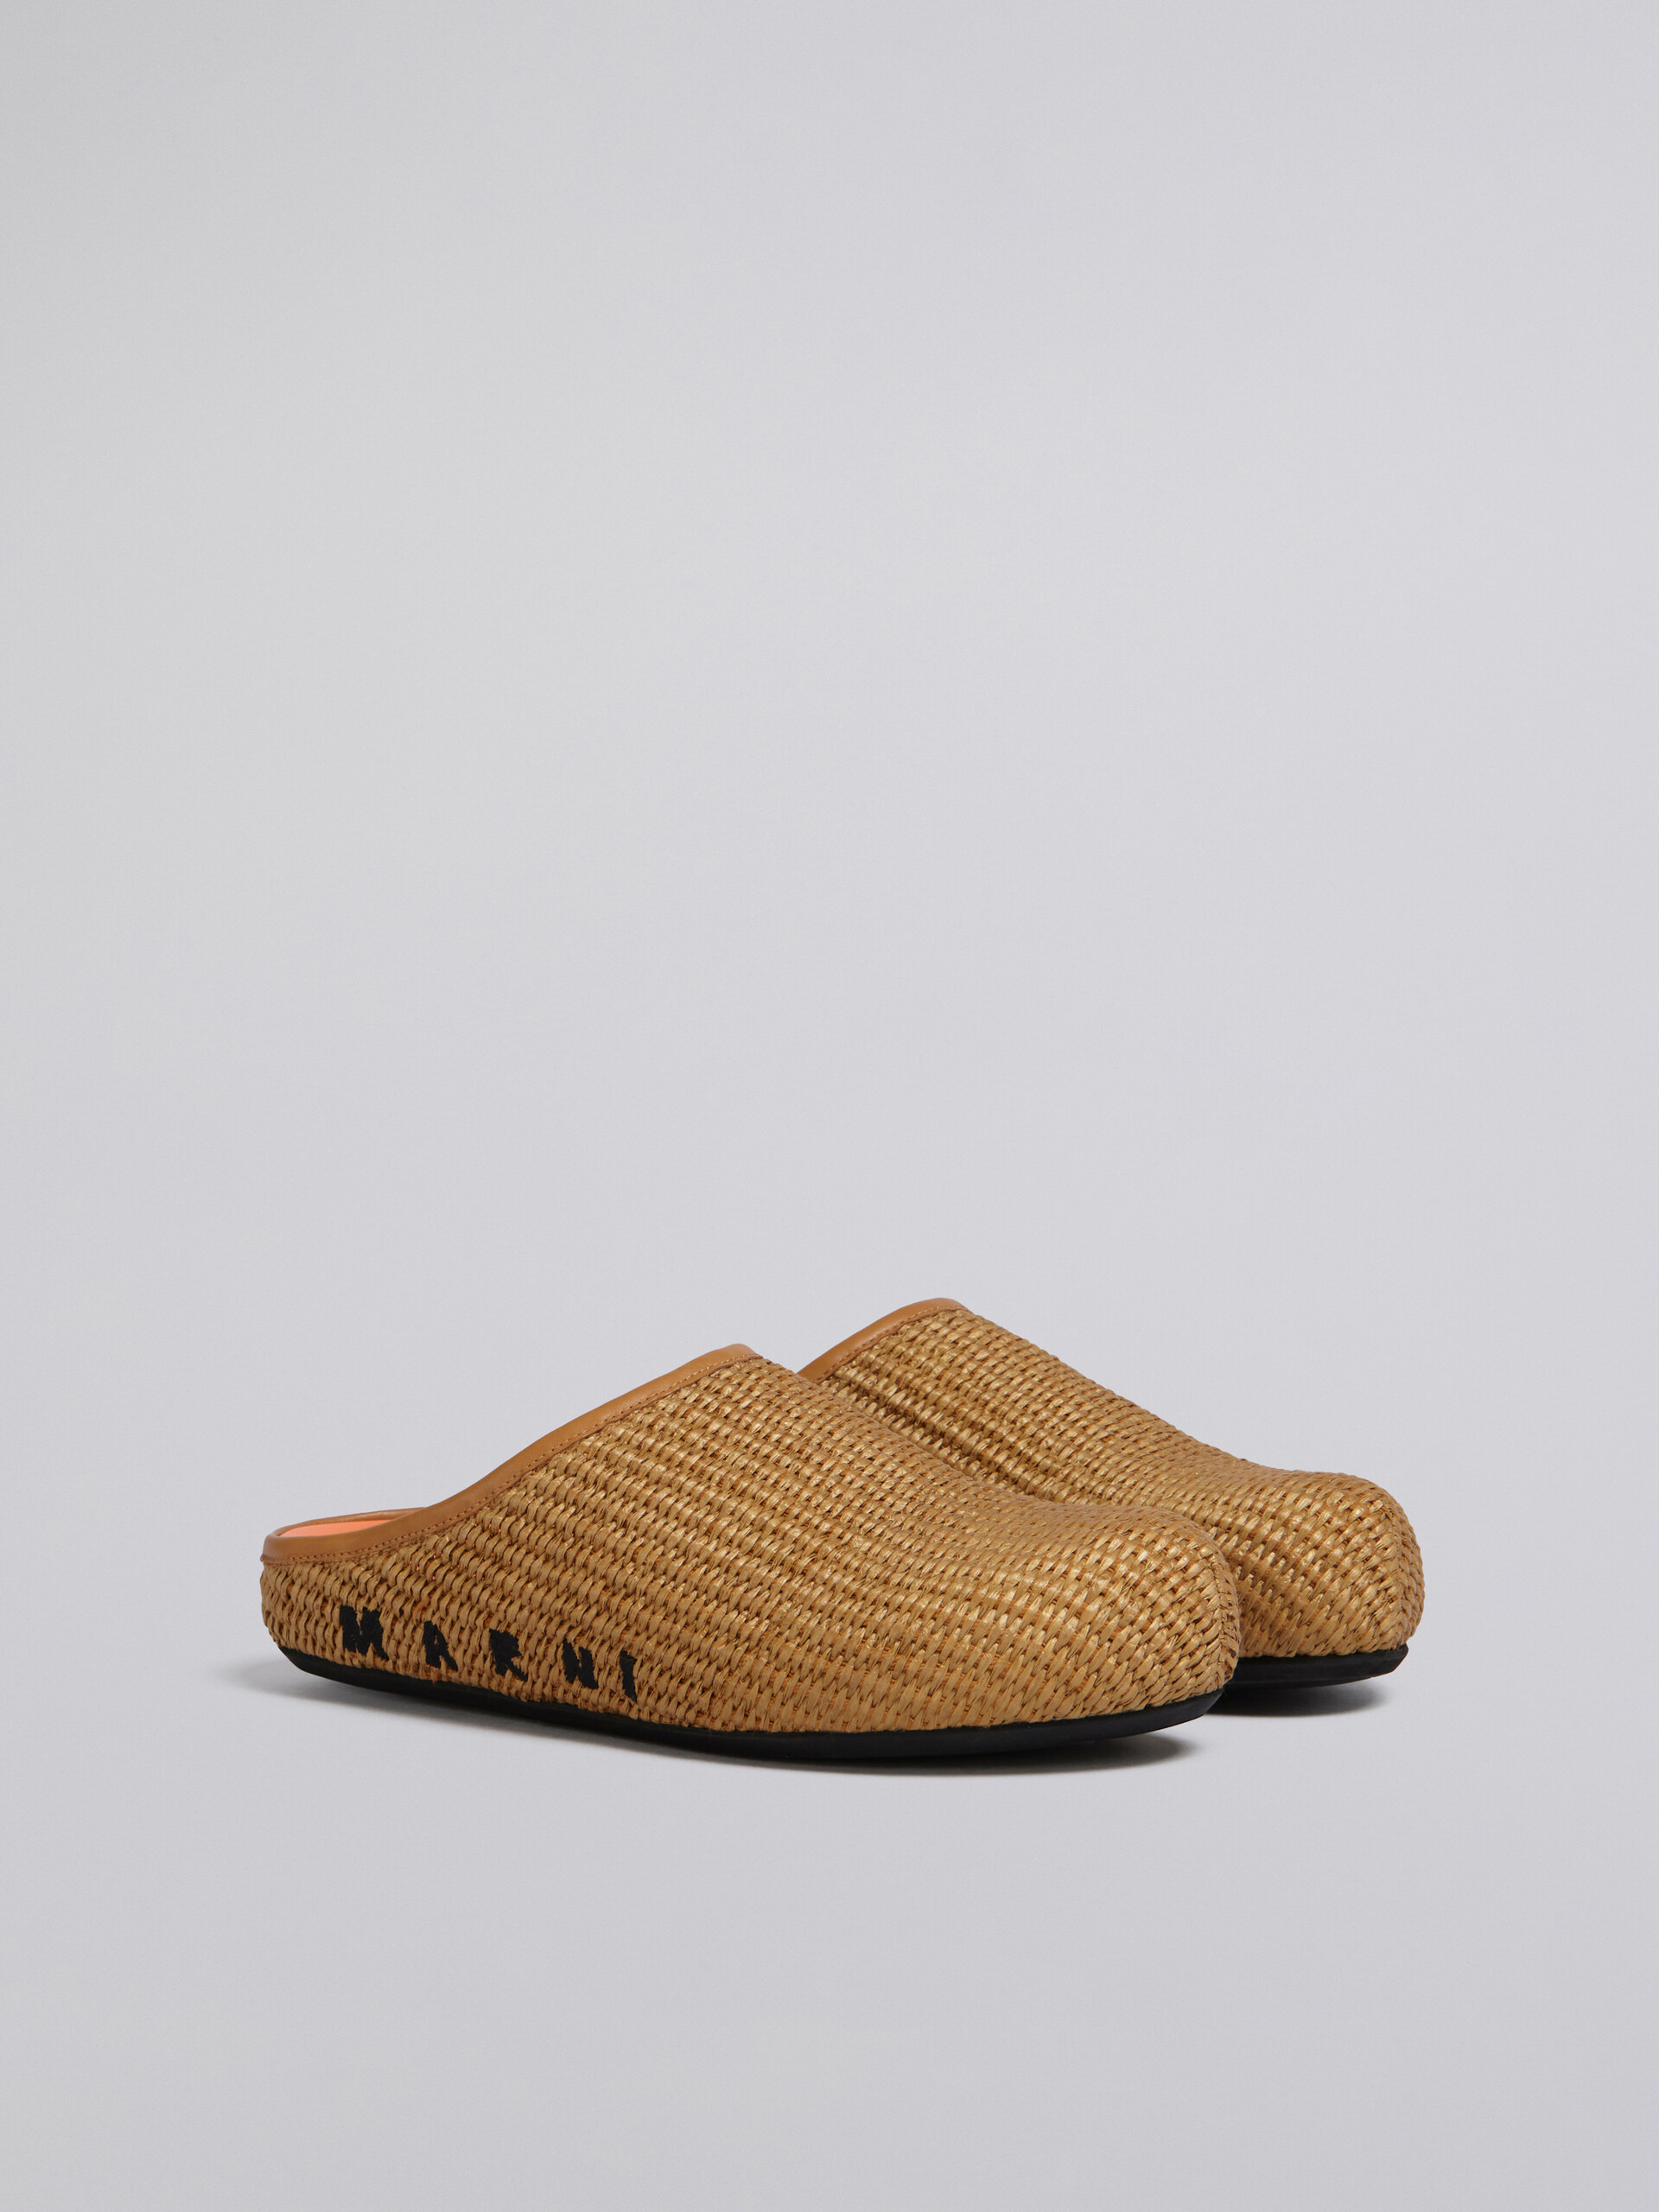 Brown raffia and leather Fussbett sabot - Clogs - Image 2